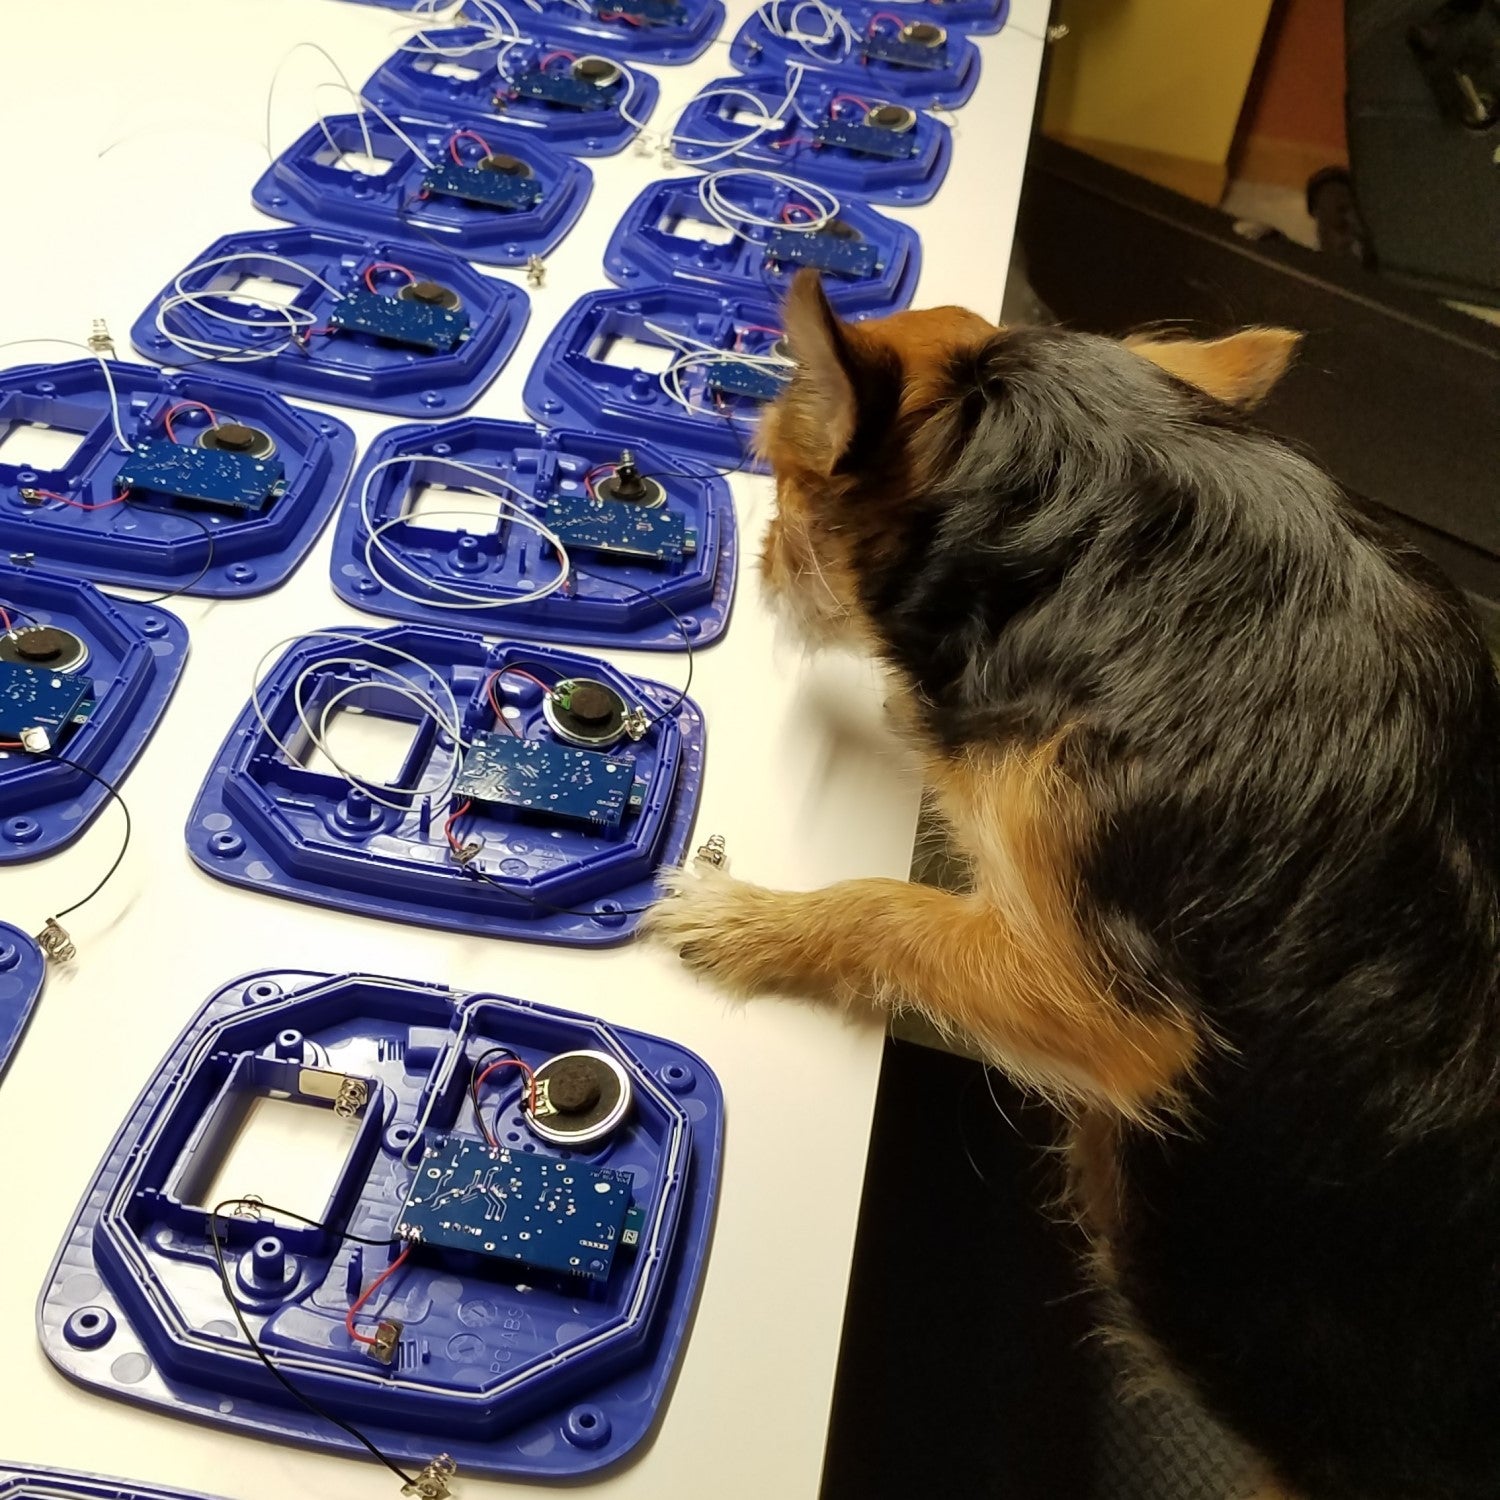 Reese inspecting production line of Paws2Go units